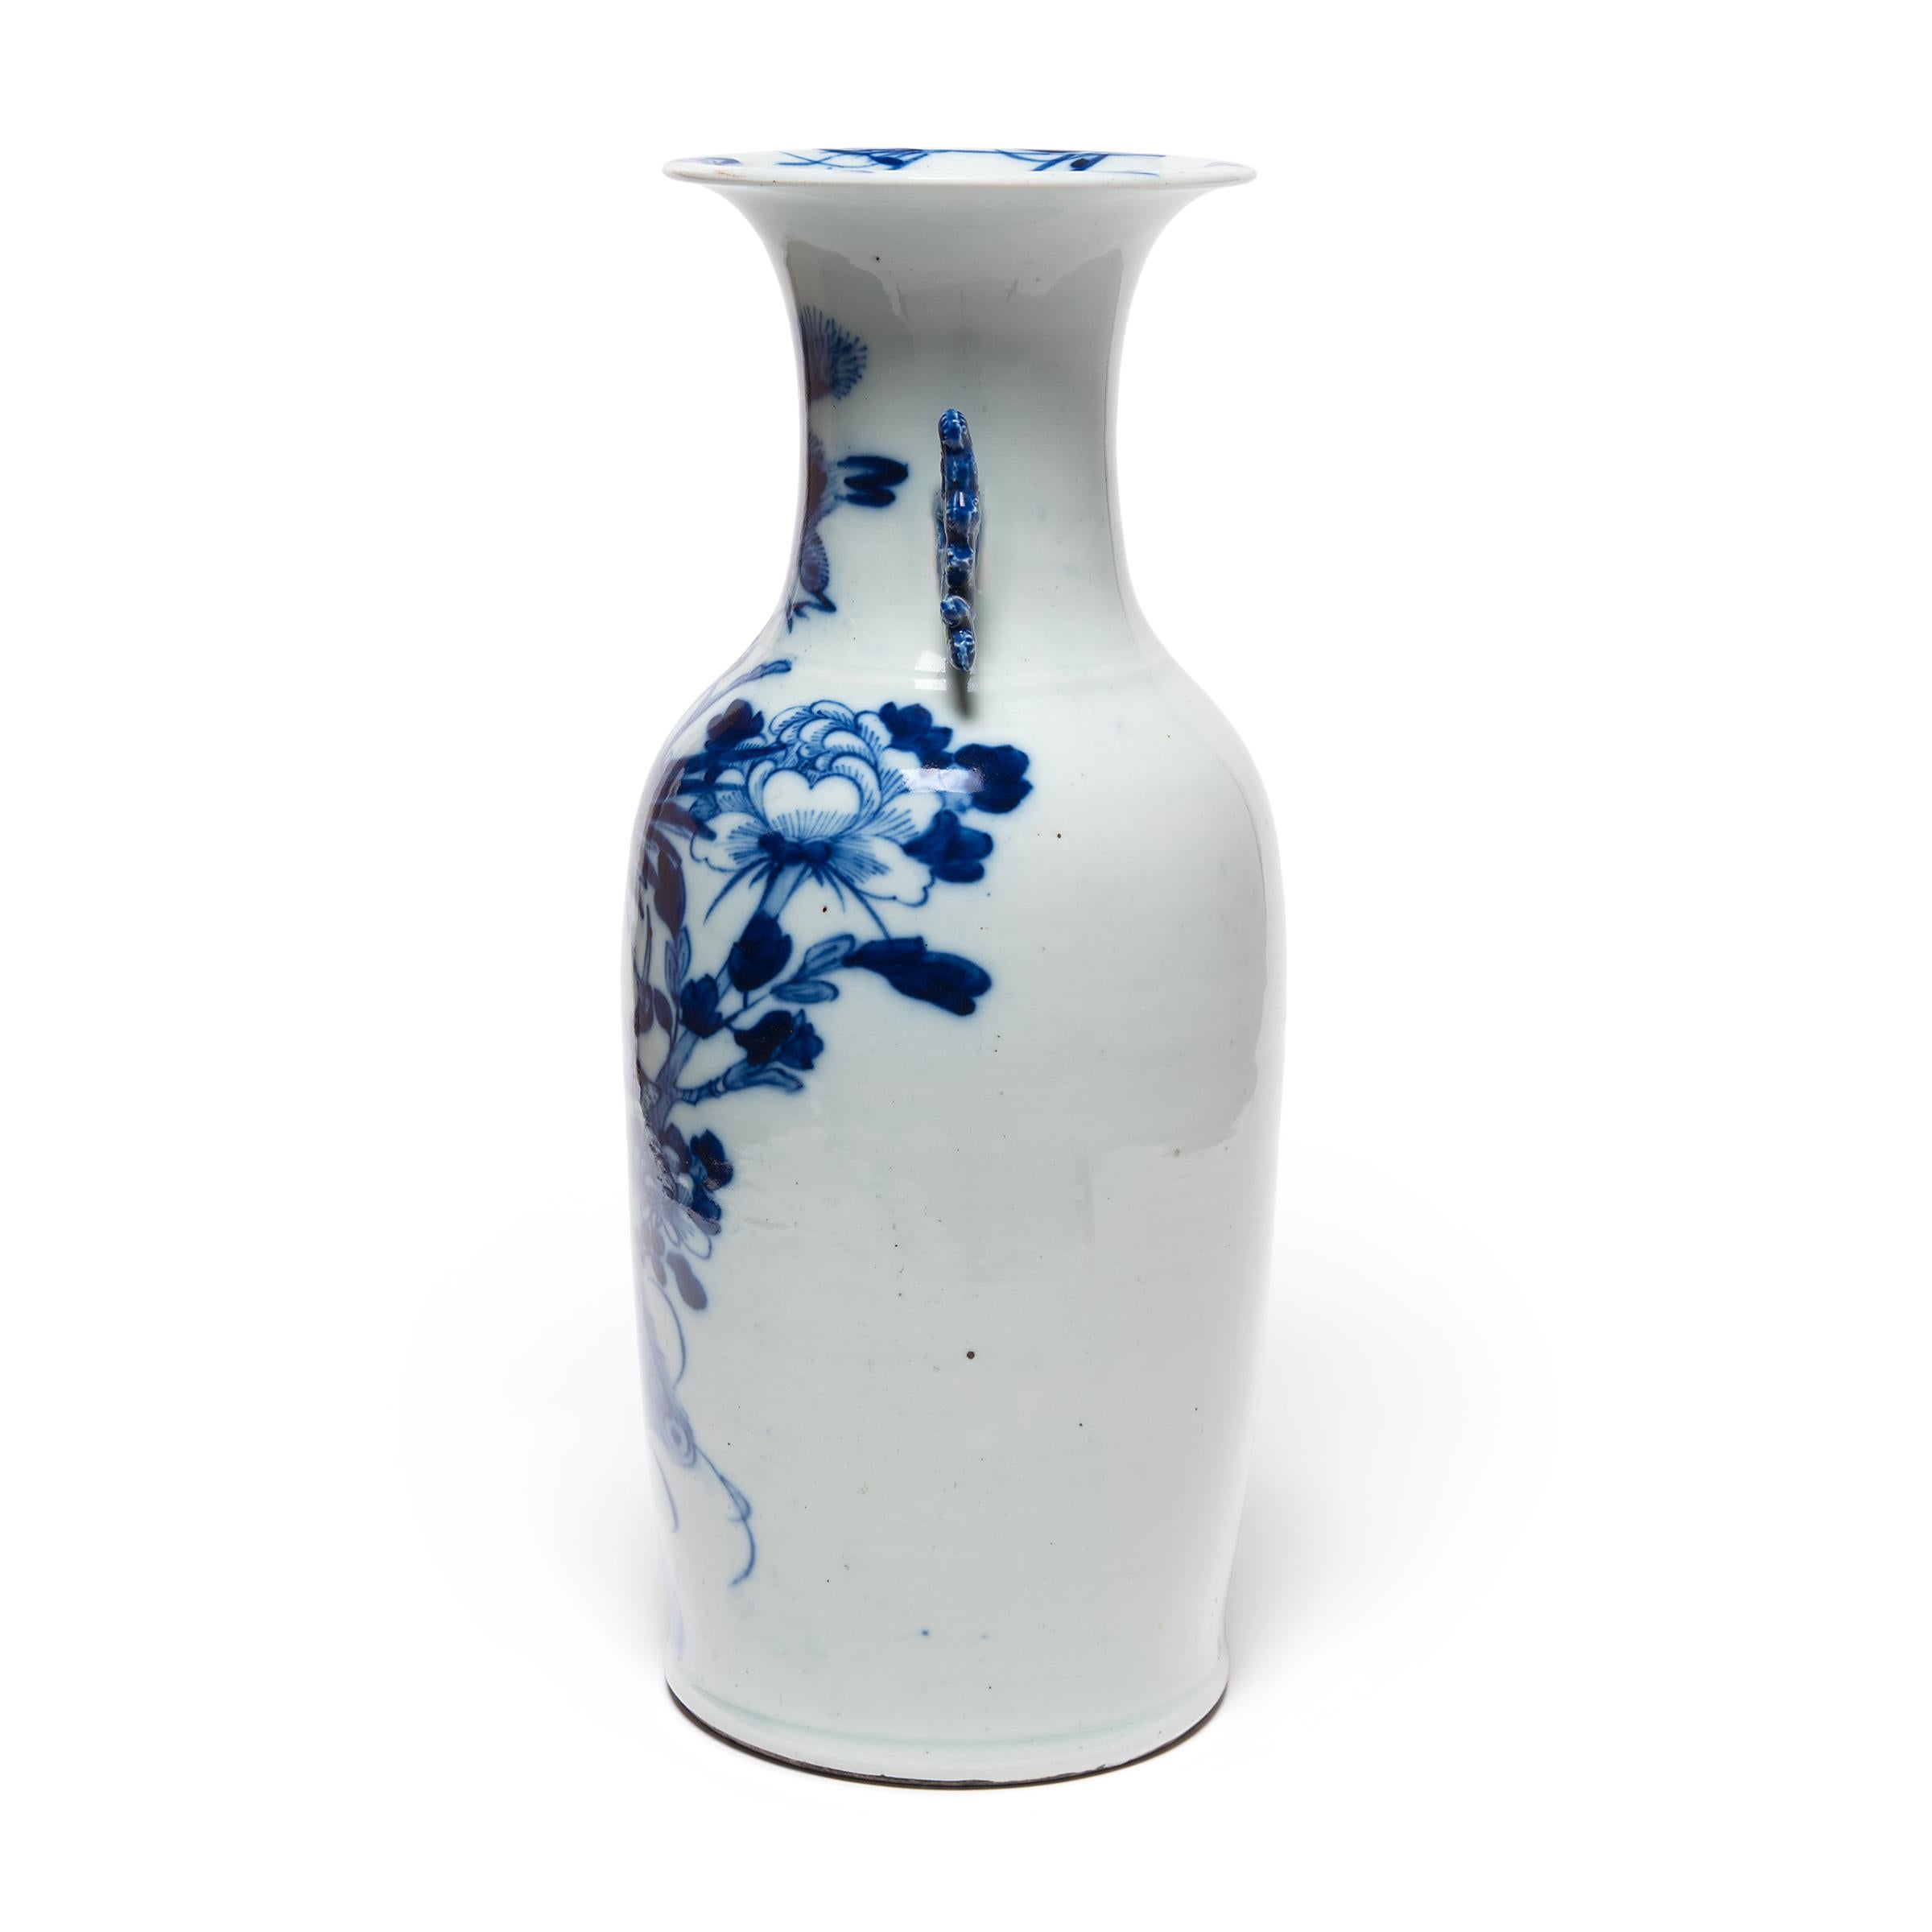 This 19th century porcelain vase is an exquisite example of Chinese blue-and-white pottery. The vase is expertly formed with thin walls, widening to a flared lip and flanked by two molded scroll handles. Painted with richly saturated cobalt